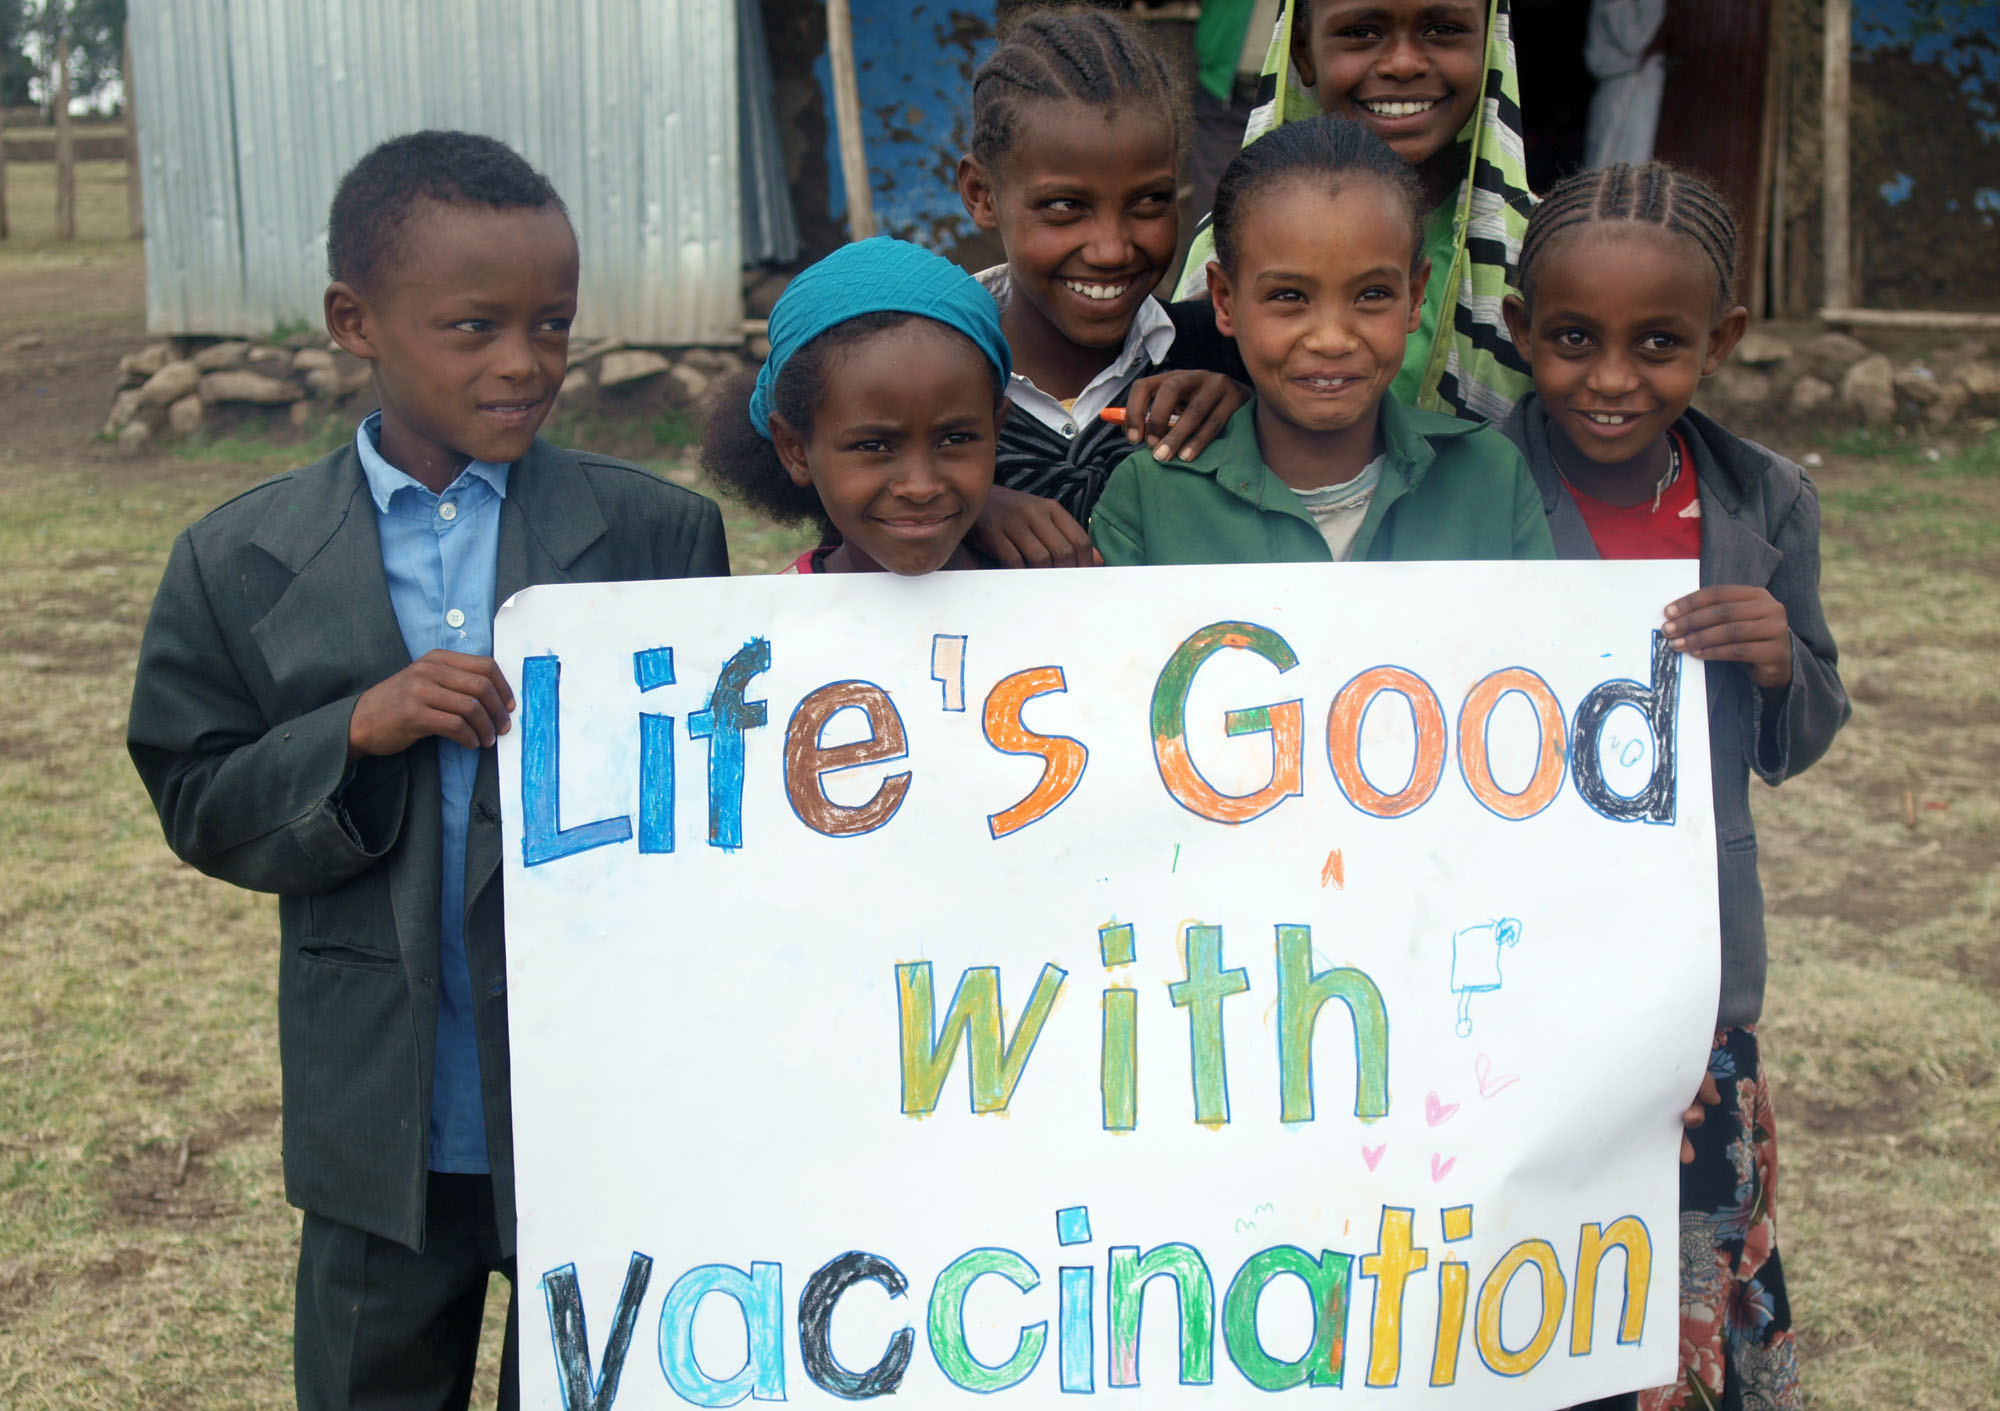 Children hold a "Life's Good with vaccination" sign together with smiles.